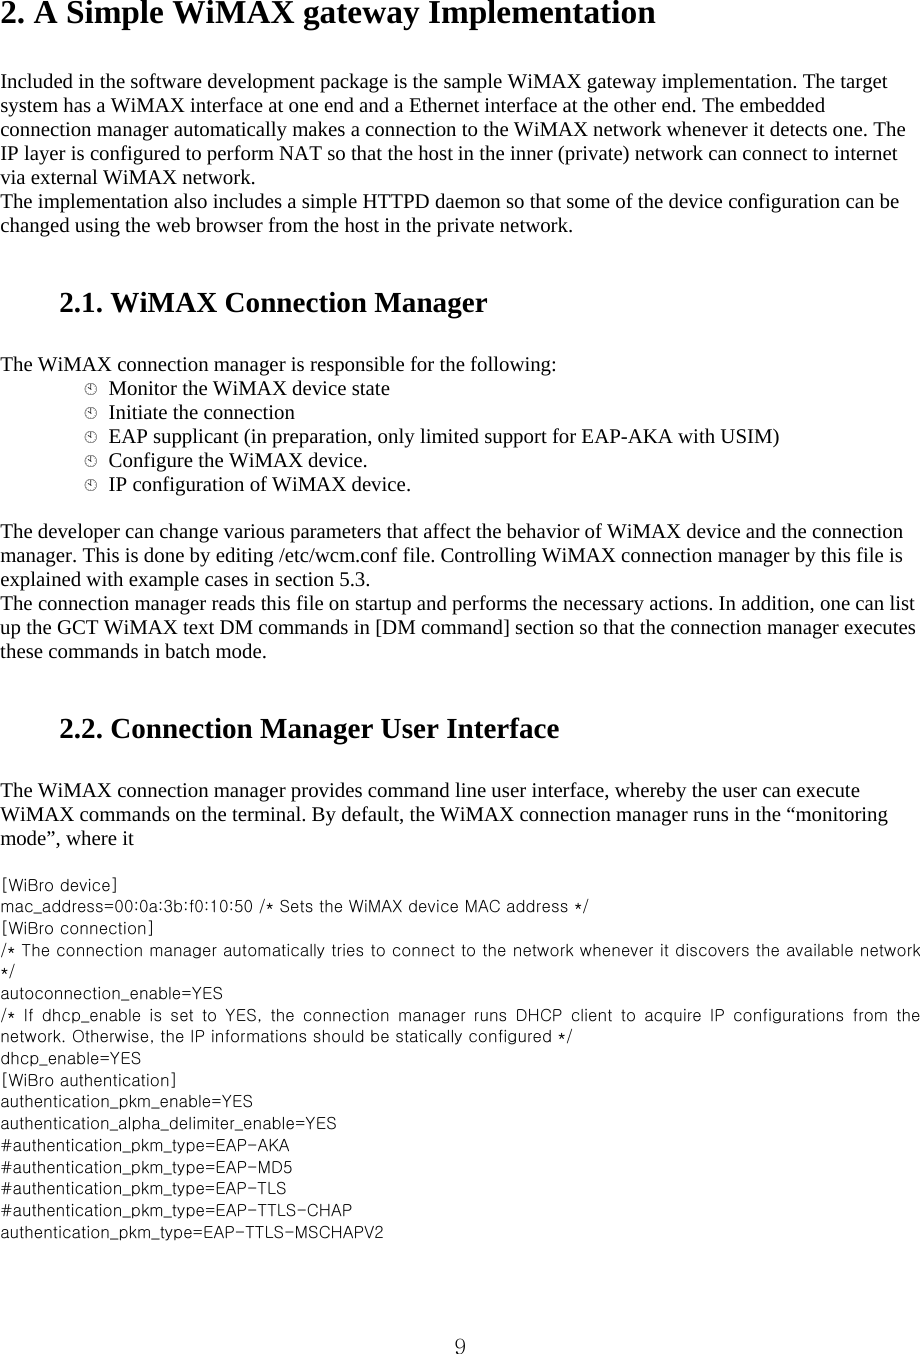  92. A Simple WiMAX gateway Implementation    Included in the software development package is the sample WiMAX gateway implementation. The target system has a WiMAX interface at one end and a Ethernet interface at the other end. The embedded connection manager automatically makes a connection to the WiMAX network whenever it detects one. The IP layer is configured to perform NAT so that the host in the inner (private) network can connect to internet via external WiMAX network.   The implementation also includes a simple HTTPD daemon so that some of the device configuration can be changed using the web browser from the host in the private network.      2.1. WiMAX Connection Manager    The WiMAX connection manager is responsible for the following:     Monitor the WiMAX device state     Initiate the connection     EAP supplicant (in preparation, only limited support for EAP-AKA with USIM)     Configure the WiMAX device.     IP configuration of WiMAX device.    The developer can change various parameters that affect the behavior of WiMAX device and the connection manager. This is done by editing /etc/wcm.conf file. Controlling WiMAX connection manager by this file is explained with example cases in section 5.3.   The connection manager reads this file on startup and performs the necessary actions. In addition, one can list up the GCT WiMAX text DM commands in [DM command] section so that the connection manager executes these commands in batch mode.      2.2. Connection Manager User Interface    The WiMAX connection manager provides command line user interface, whereby the user can execute WiMAX commands on the terminal. By default, the WiMAX connection manager runs in the “monitoring mode”, where it    [WiBro device]   mac_address=00:0a:3b:f0:10:50 /* Sets the WiMAX device MAC address */   [WiBro connection]   /* The connection manager automatically tries to connect to the network whenever it discovers the available network */   autoconnection_enable=YES   /*  If  dhcp_enable  is  set  to  YES,  the  connection  manager  runs  DHCP client to acquire IP configurations from the network. Otherwise, the IP informations should be statically configured */   dhcp_enable=YES   [WiBro authentication]   authentication_pkm_enable=YES   authentication_alpha_delimiter_enable=YES   #authentication_pkm_type=EAP-AKA   #authentication_pkm_type=EAP-MD5   #authentication_pkm_type=EAP-TLS   #authentication_pkm_type=EAP-TTLS-CHAP   authentication_pkm_type=EAP-TTLS-MSCHAPV2   